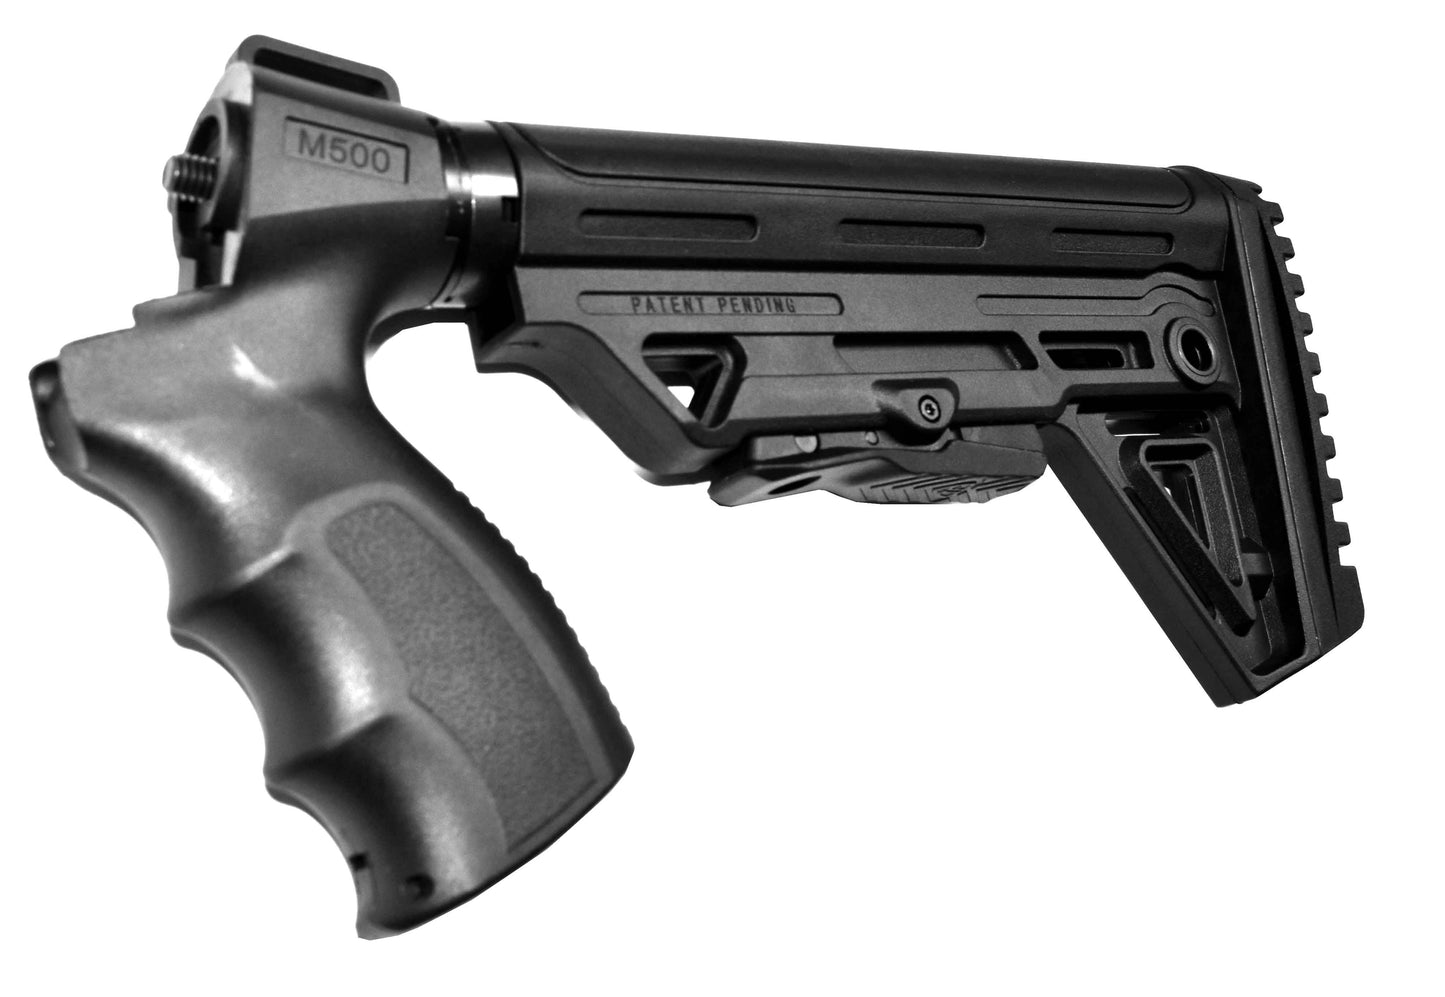 Tactical Fury Stock Compatible With Mossberg 500 12 Gauge Pump.